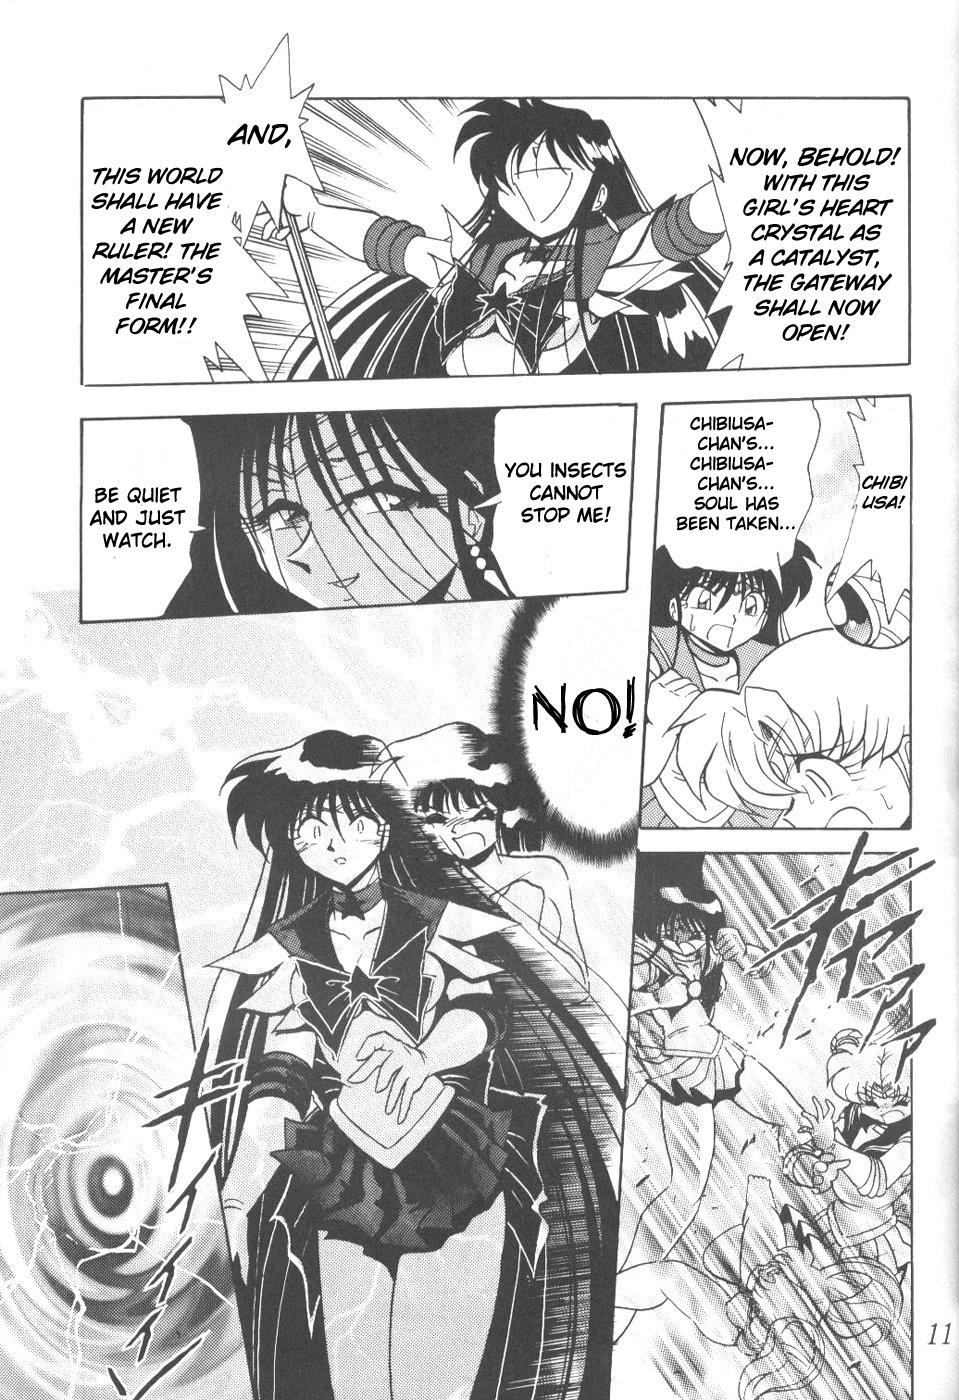 Reverse Cowgirl Silent Saturn 8 - Sailor moon Gay Gloryhole - Page 8